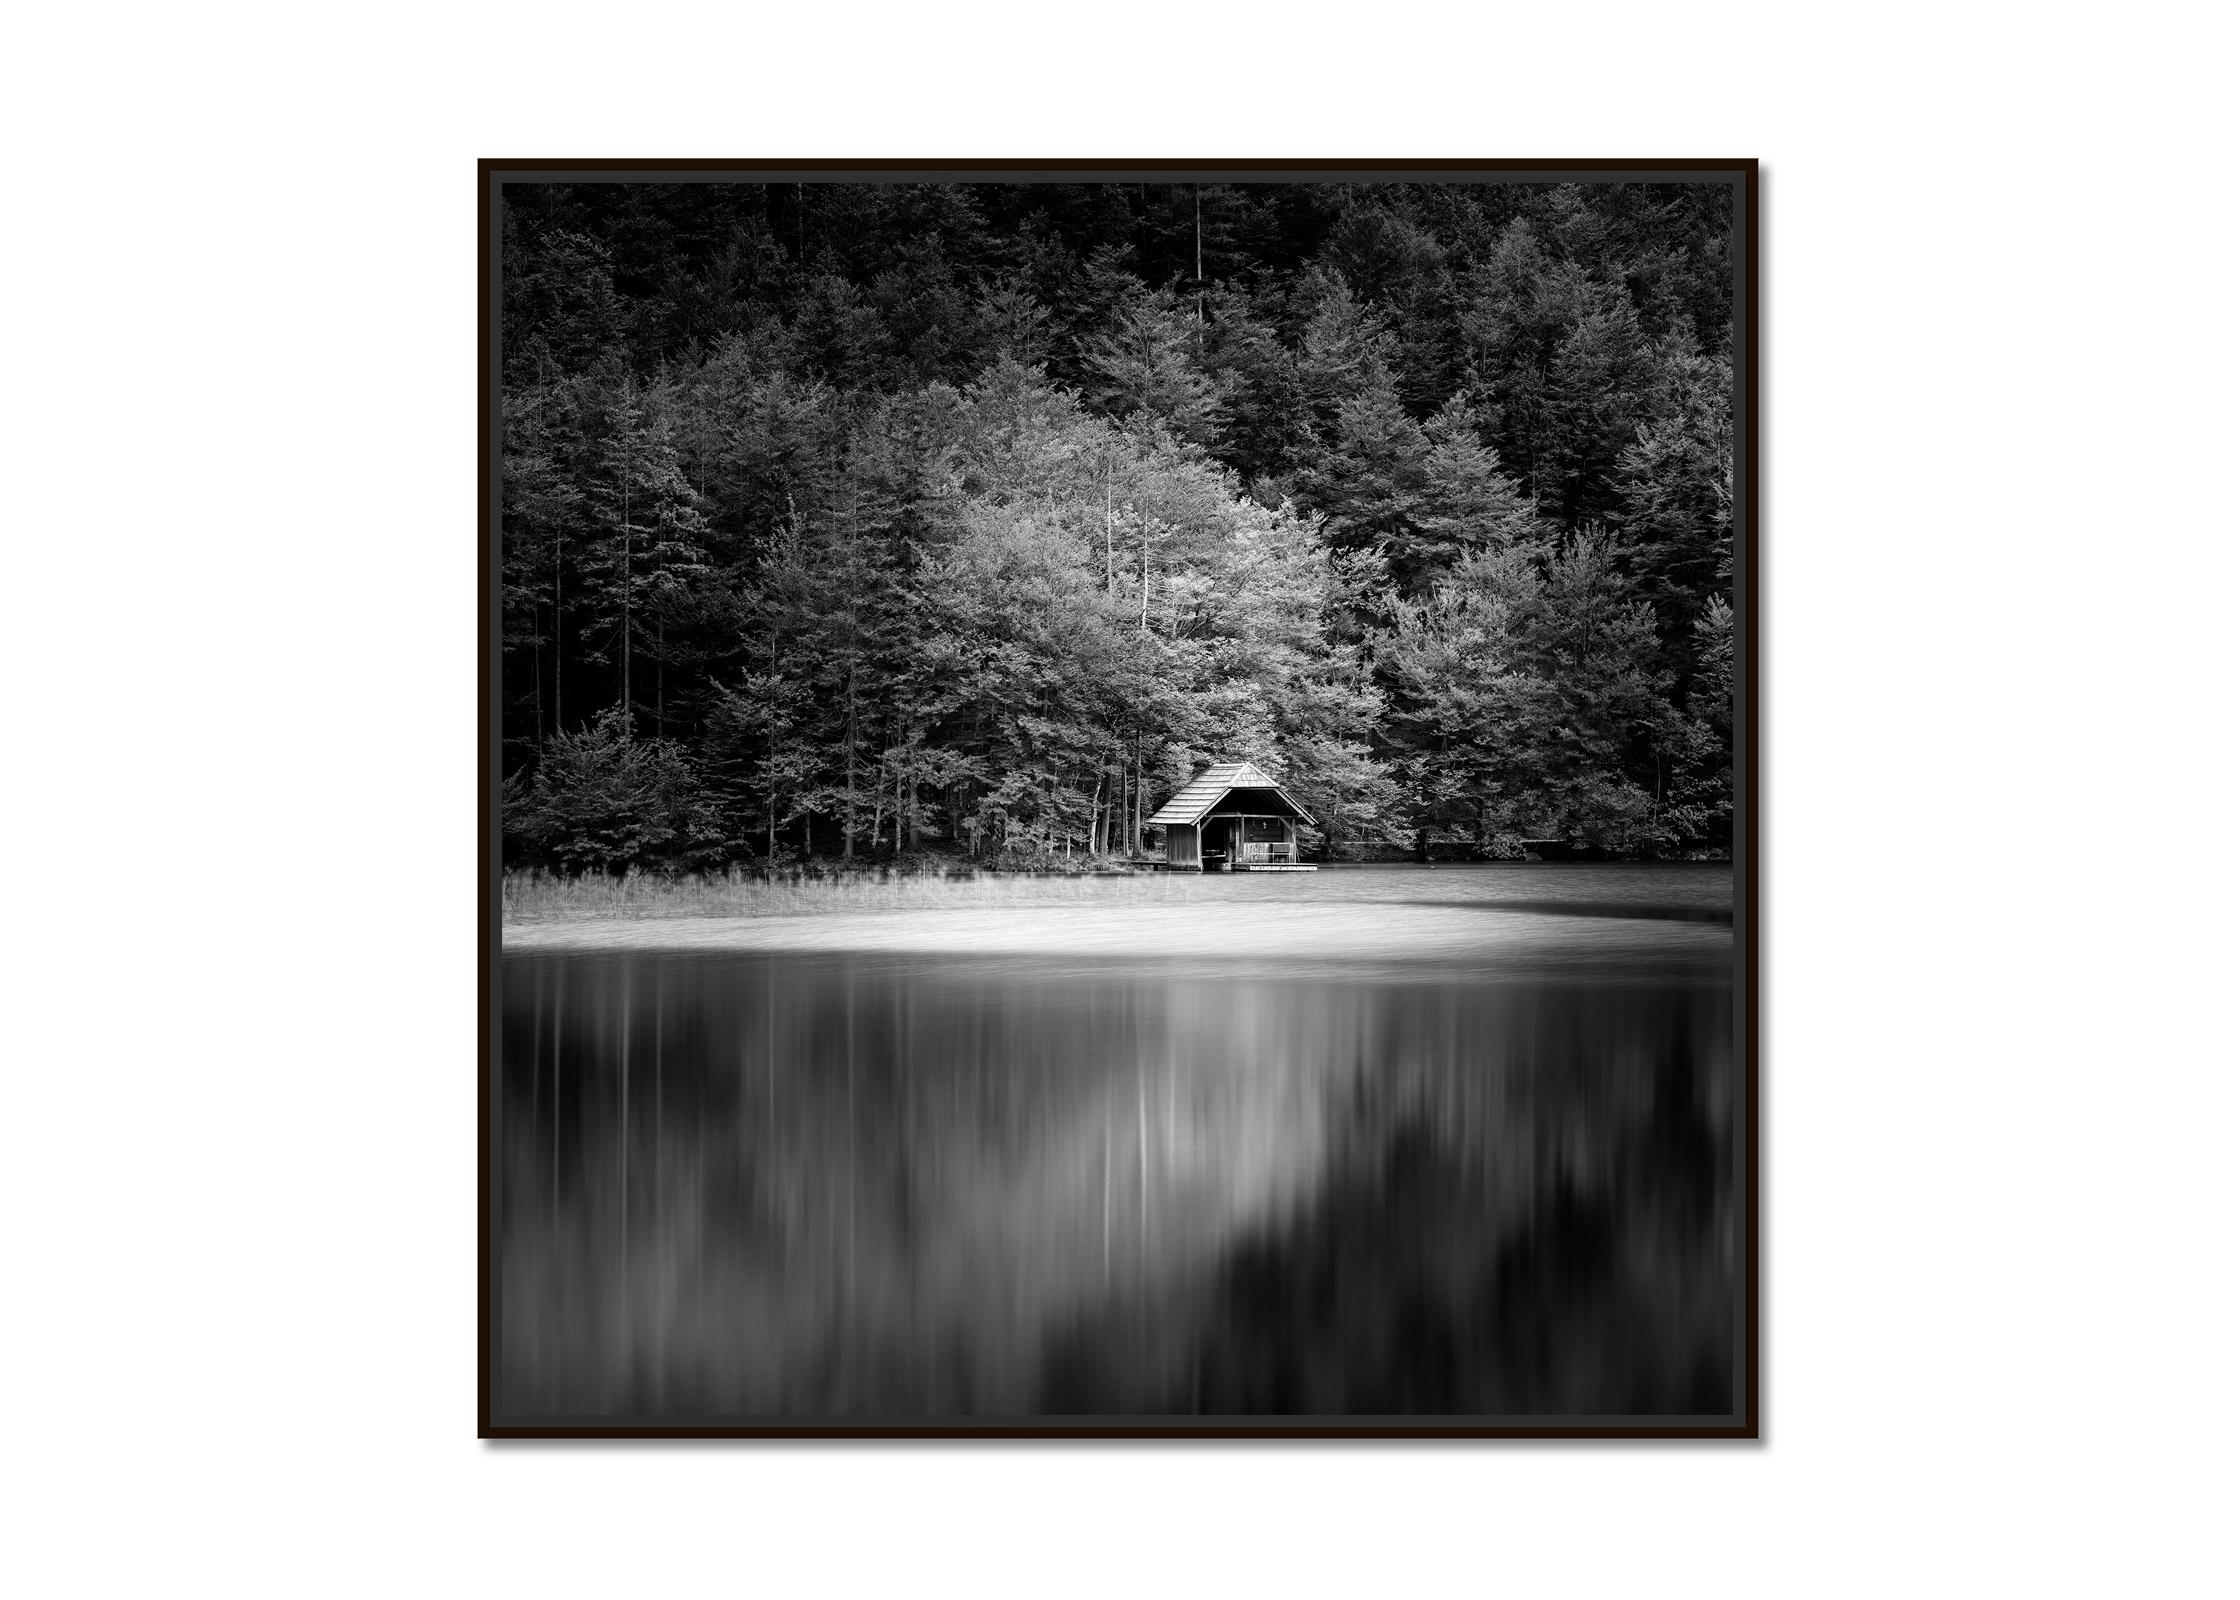 Wooden Boat House, black and white long exposure photography, fine art landscape - Photograph by Gerald Berghammer